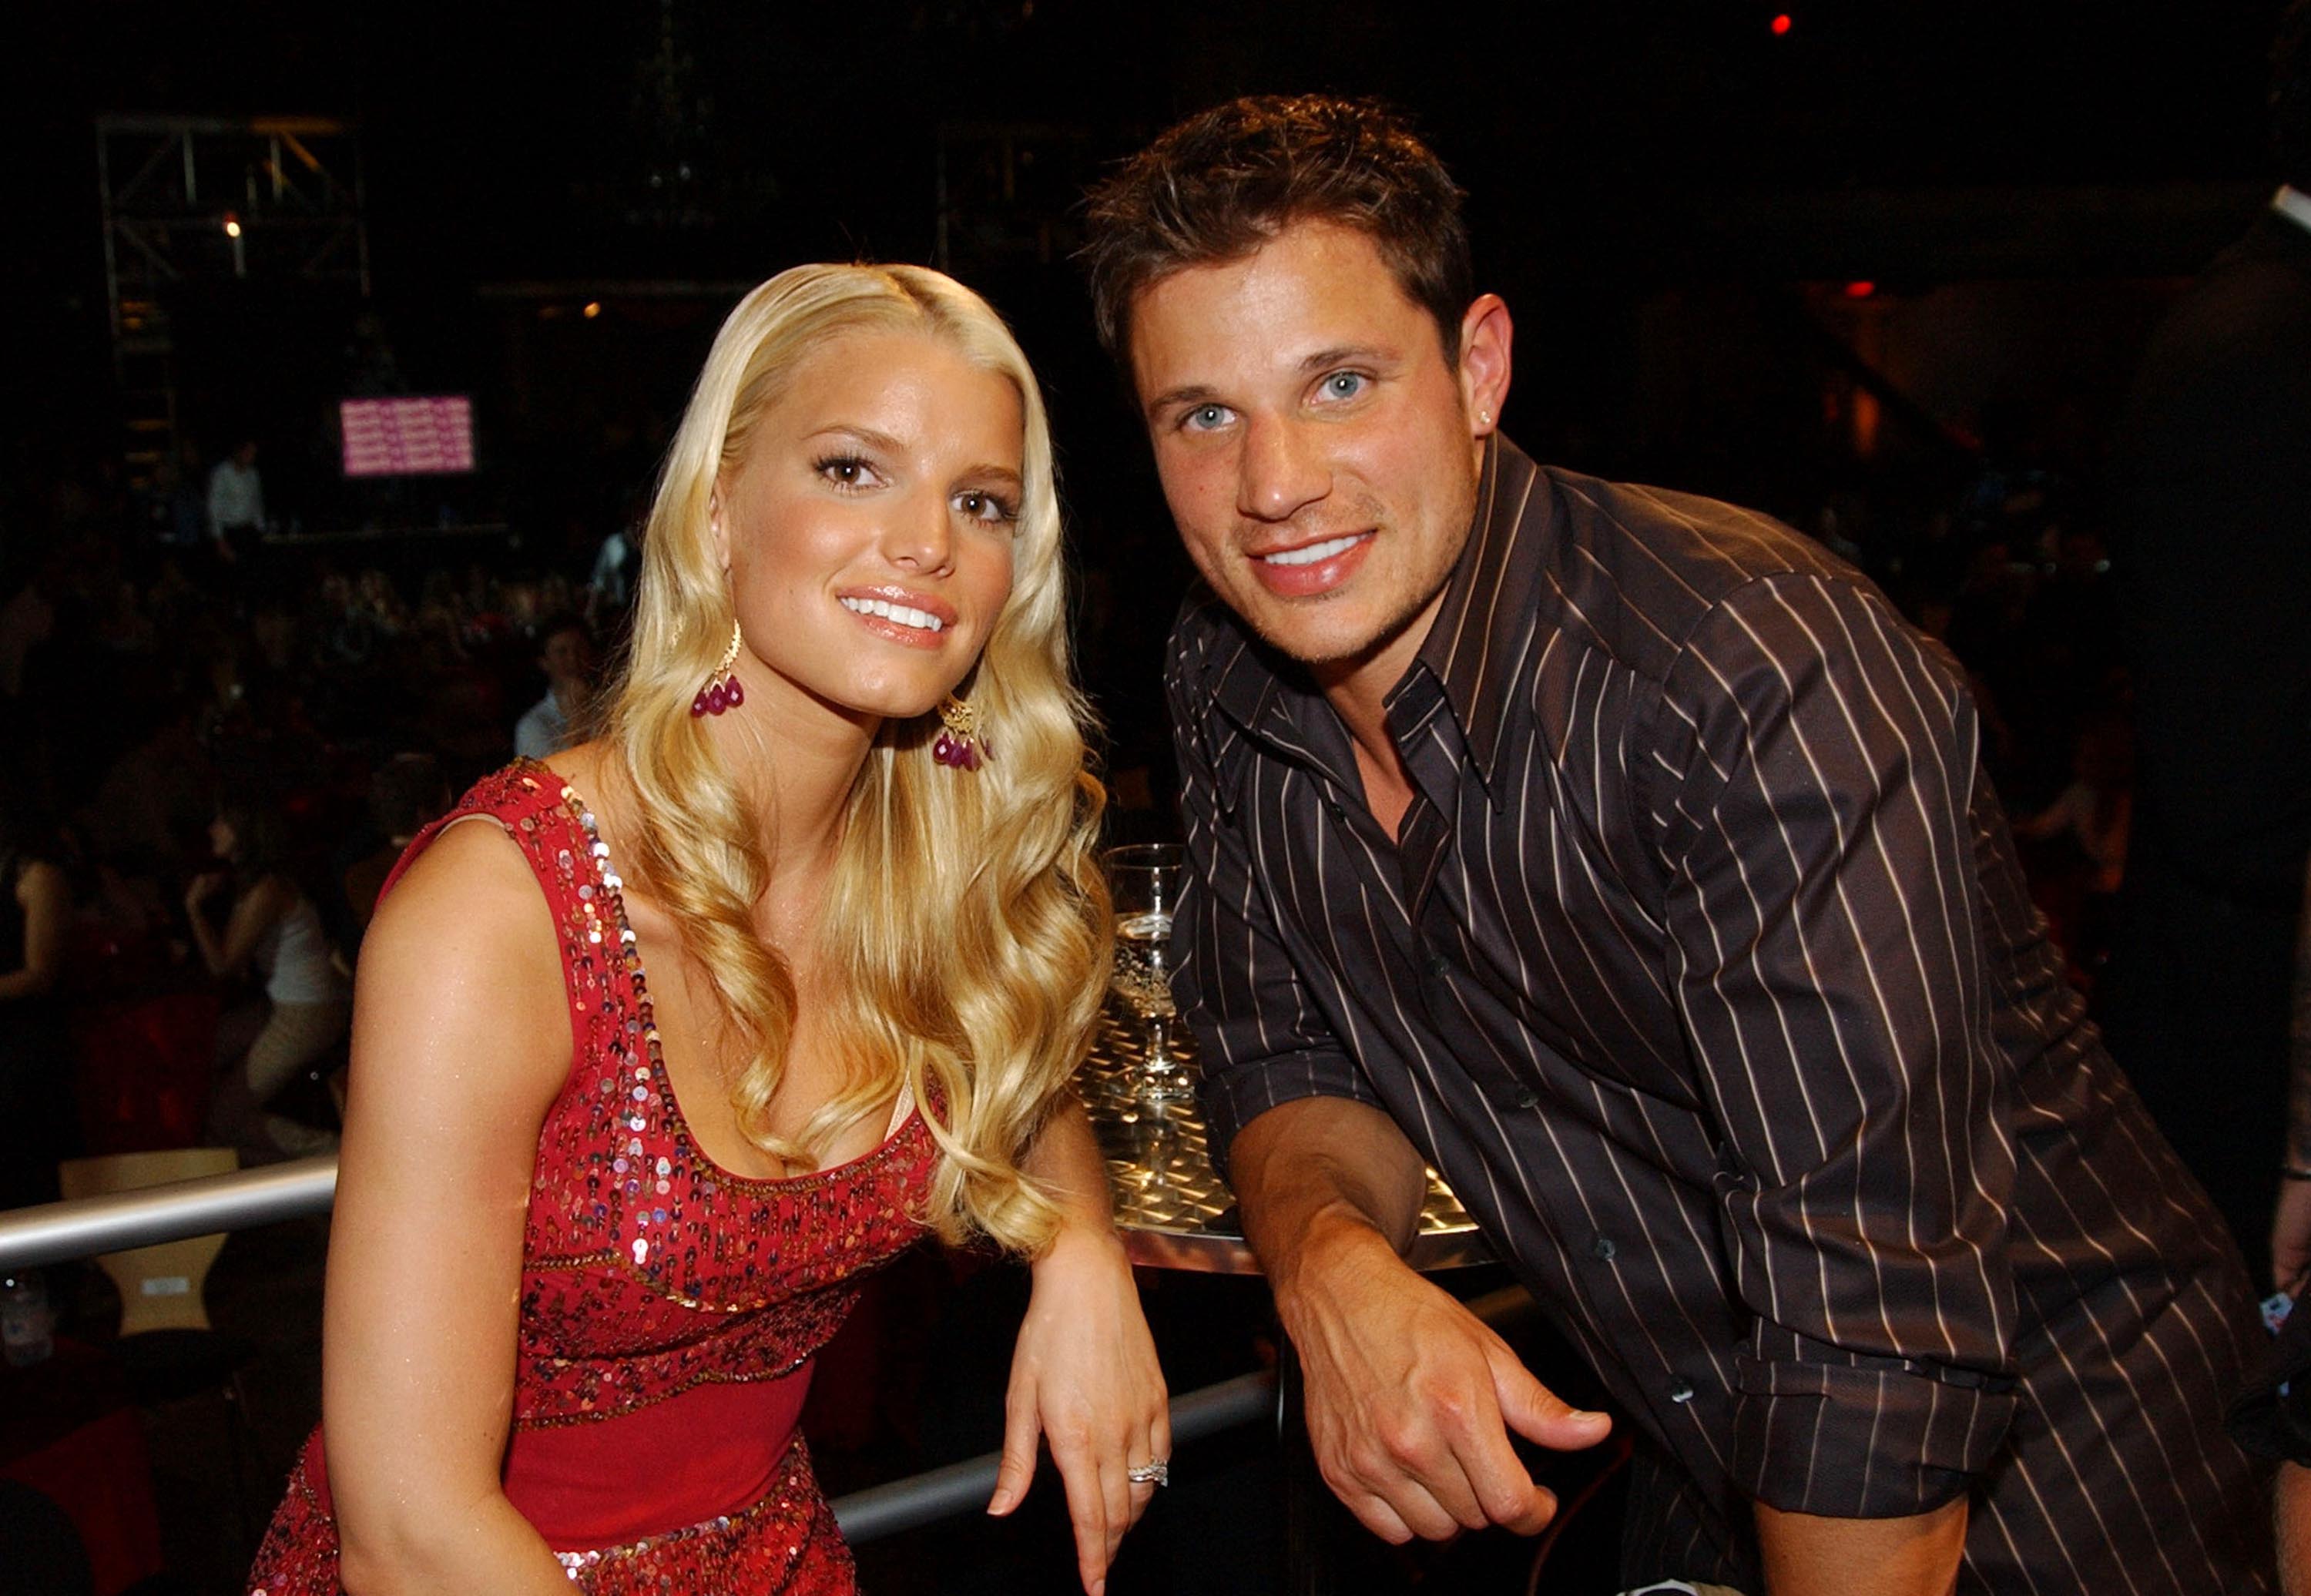 Jessica Simpson and Nick Lachey at MTV Bash - Backstage and Audience in Hollywood on June 28, 2003. (Jeff Kravitz—FilmMagic/Getty Images)